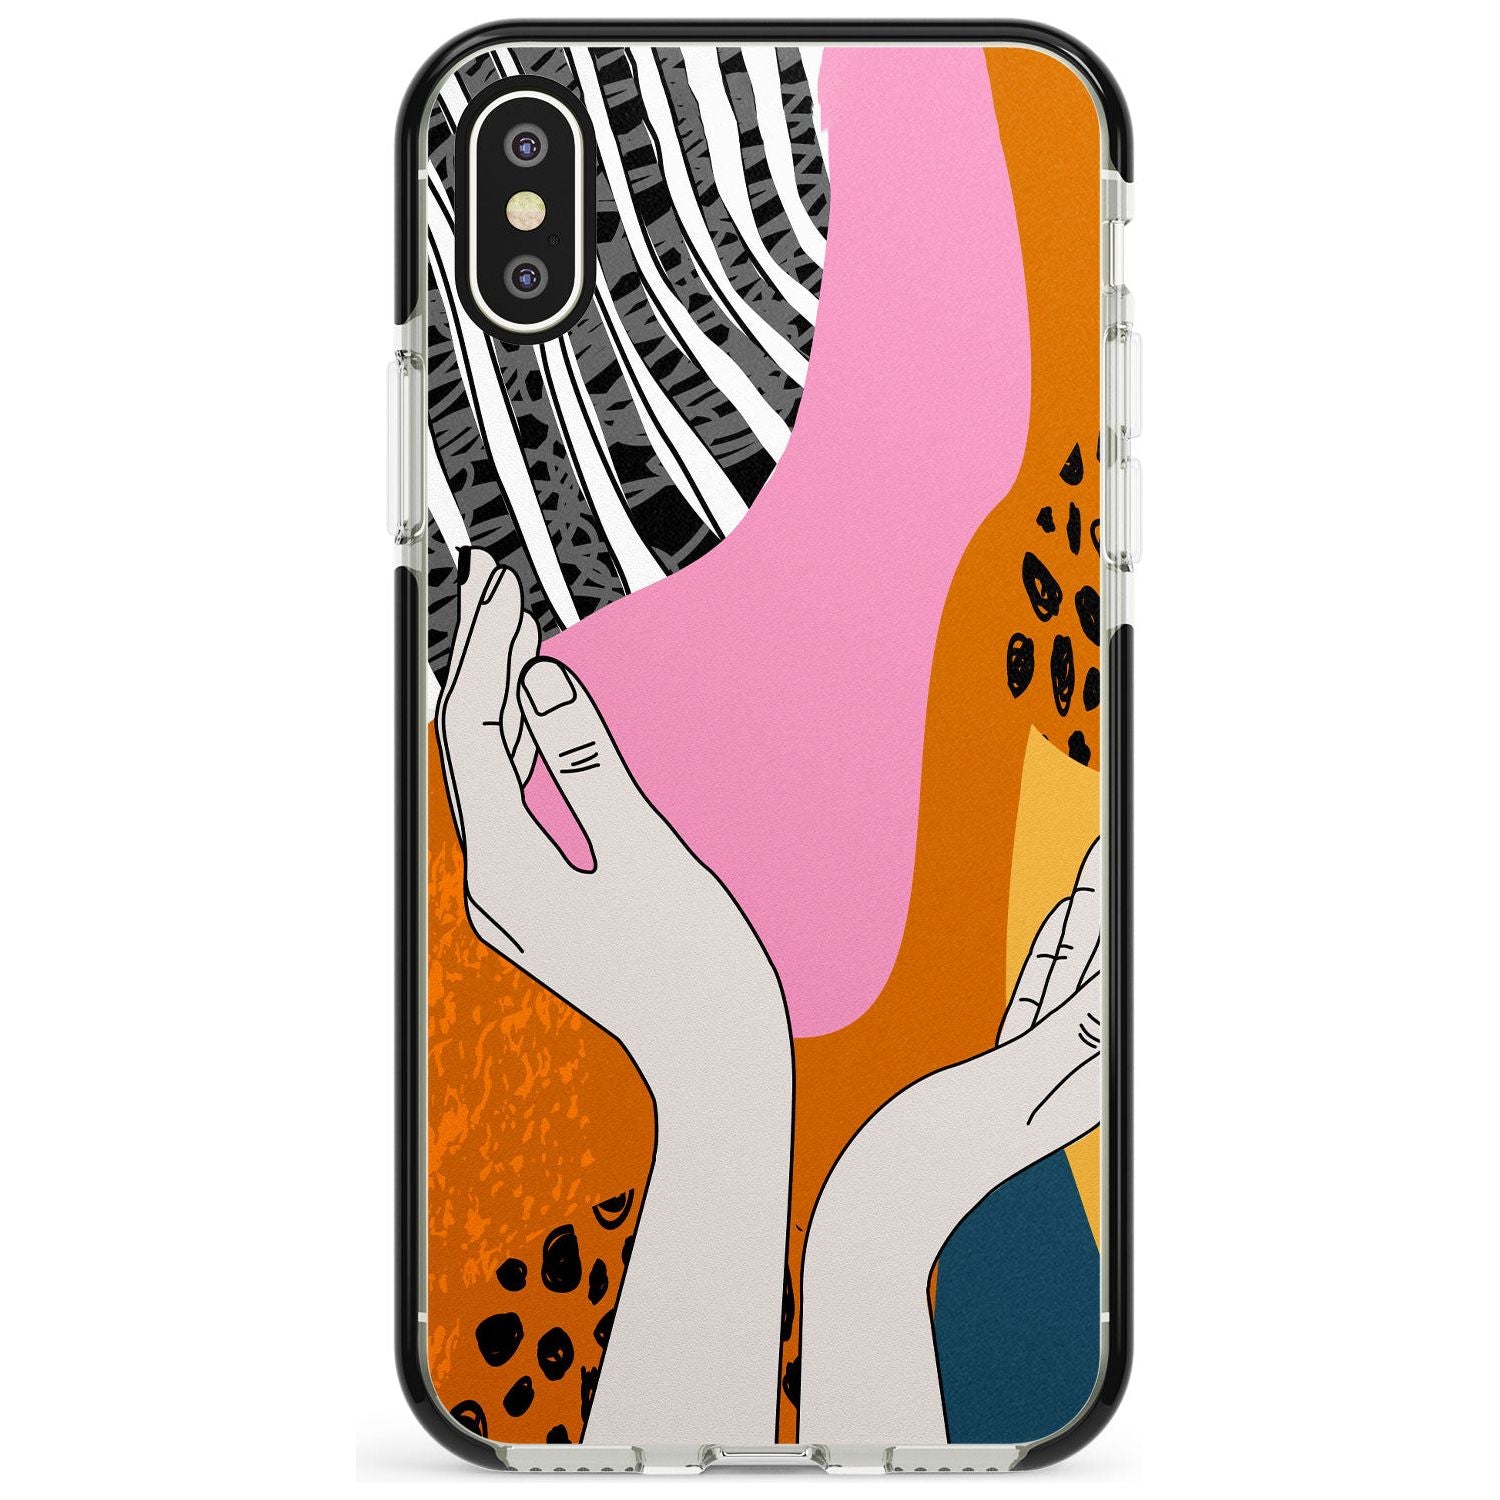 Catching Feels Pink Fade Impact Phone Case for iPhone X XS Max XR